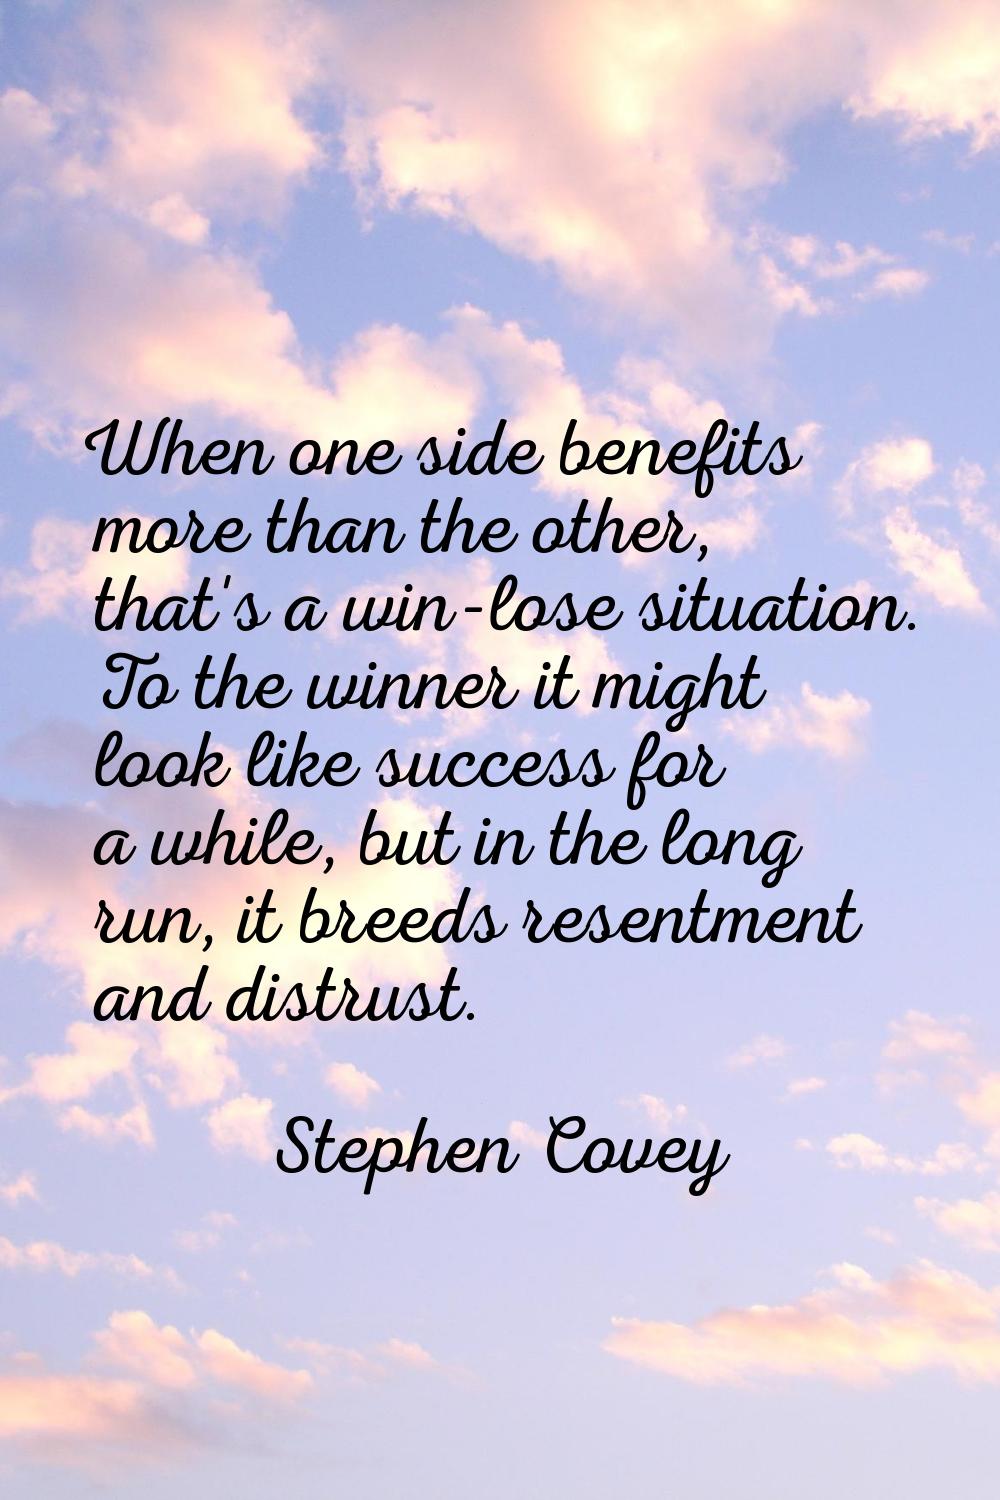 When one side benefits more than the other, that's a win-lose situation. To the winner it might loo